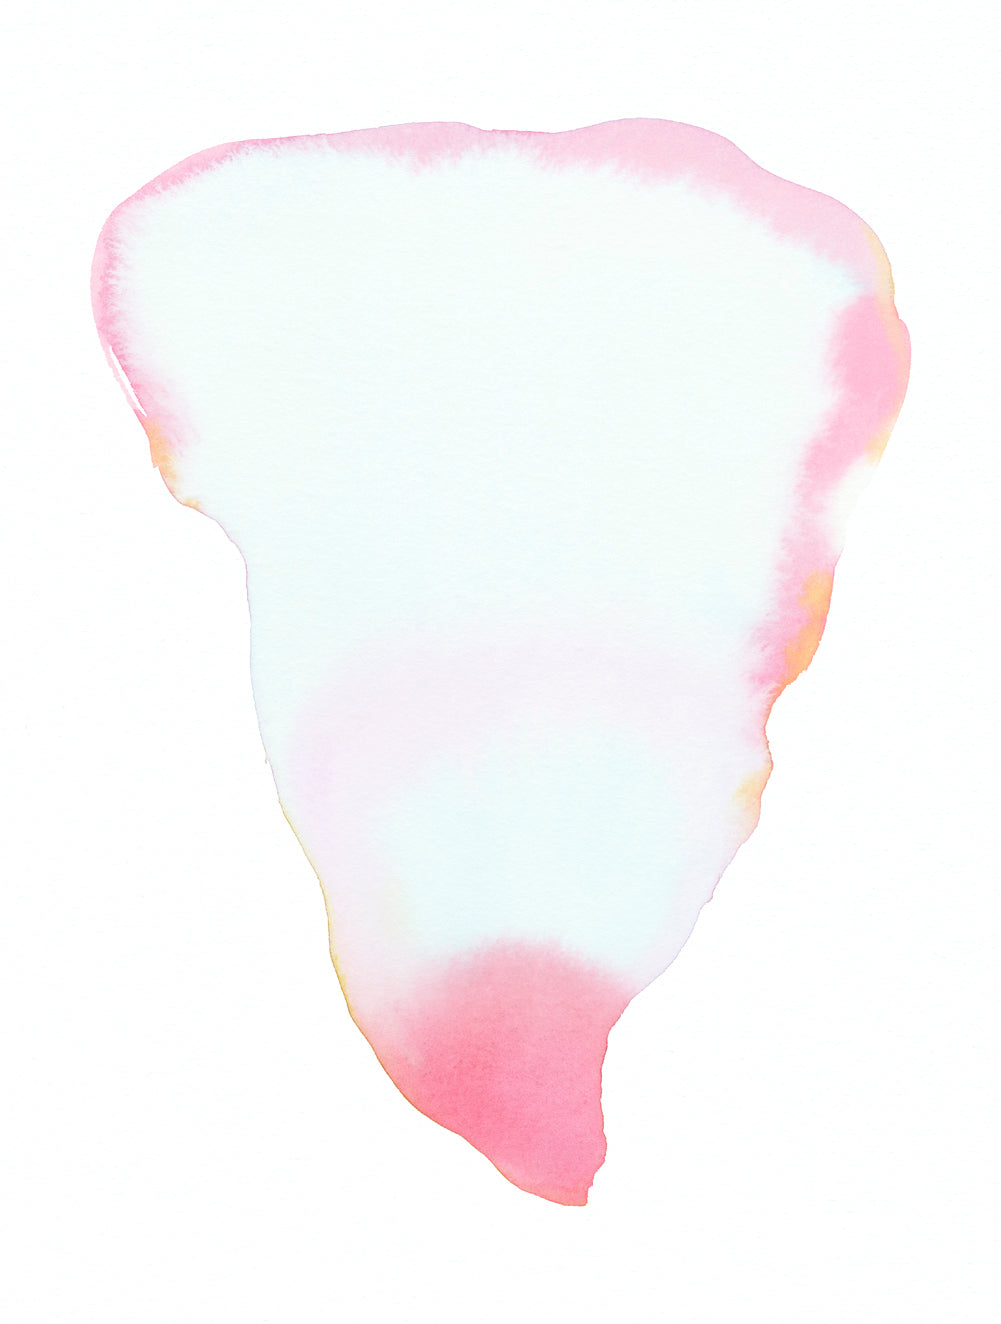 Petal Form, New Rose | Print by Malissa Ryder